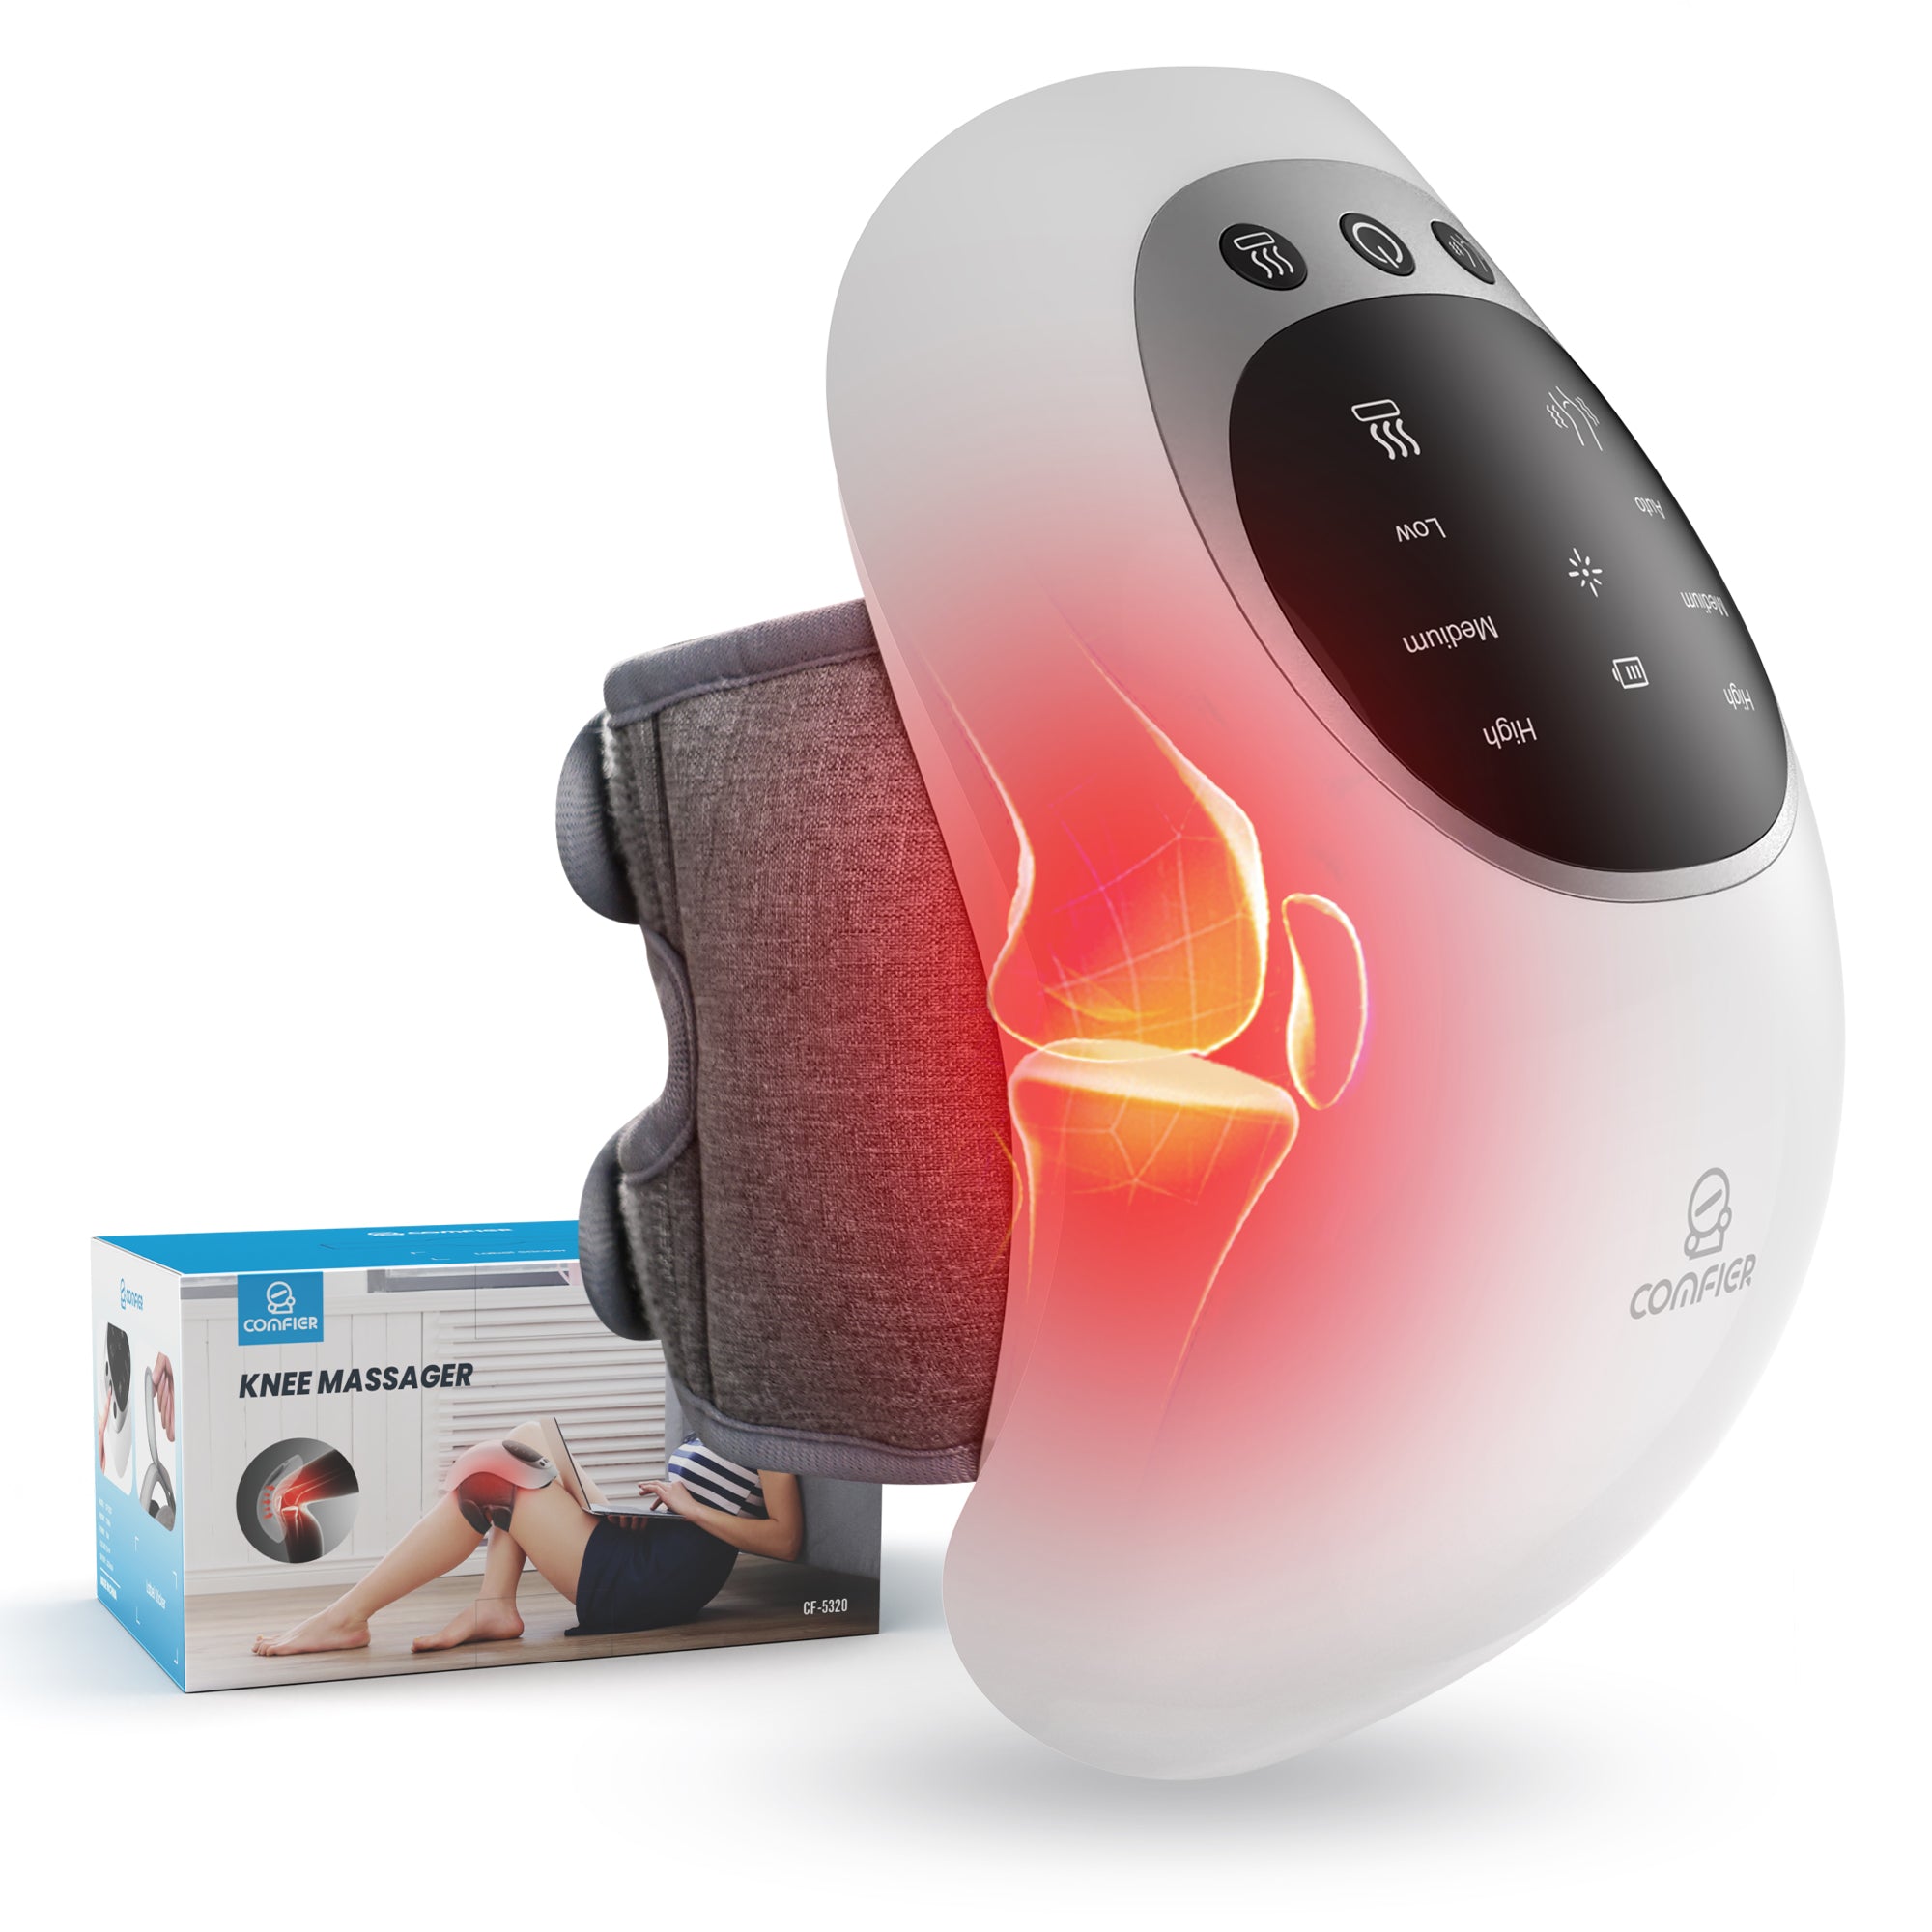  Knee Massager with Heat and Red Light, Heating Pad for